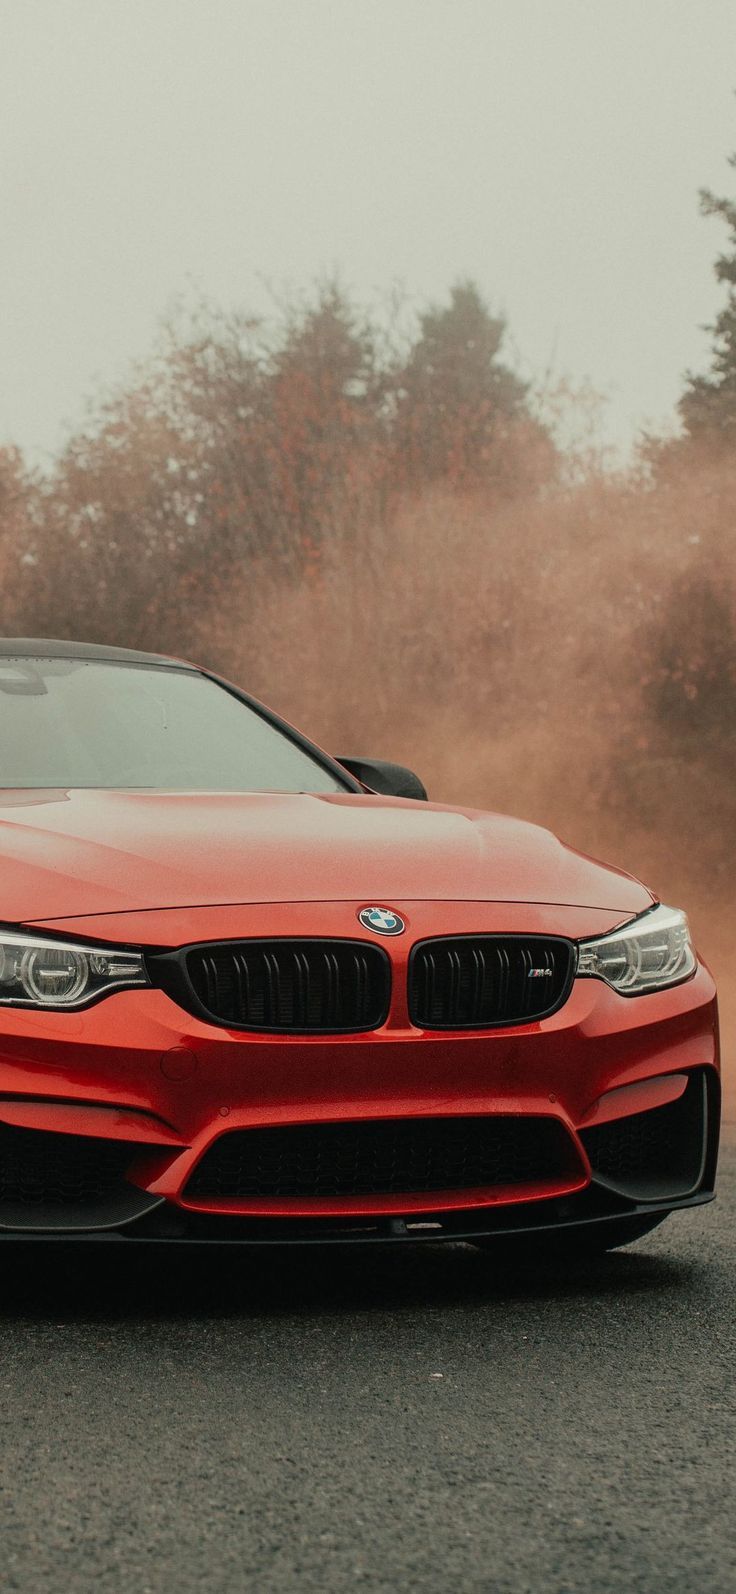 A red BMW M4 is driving on a road - BMW